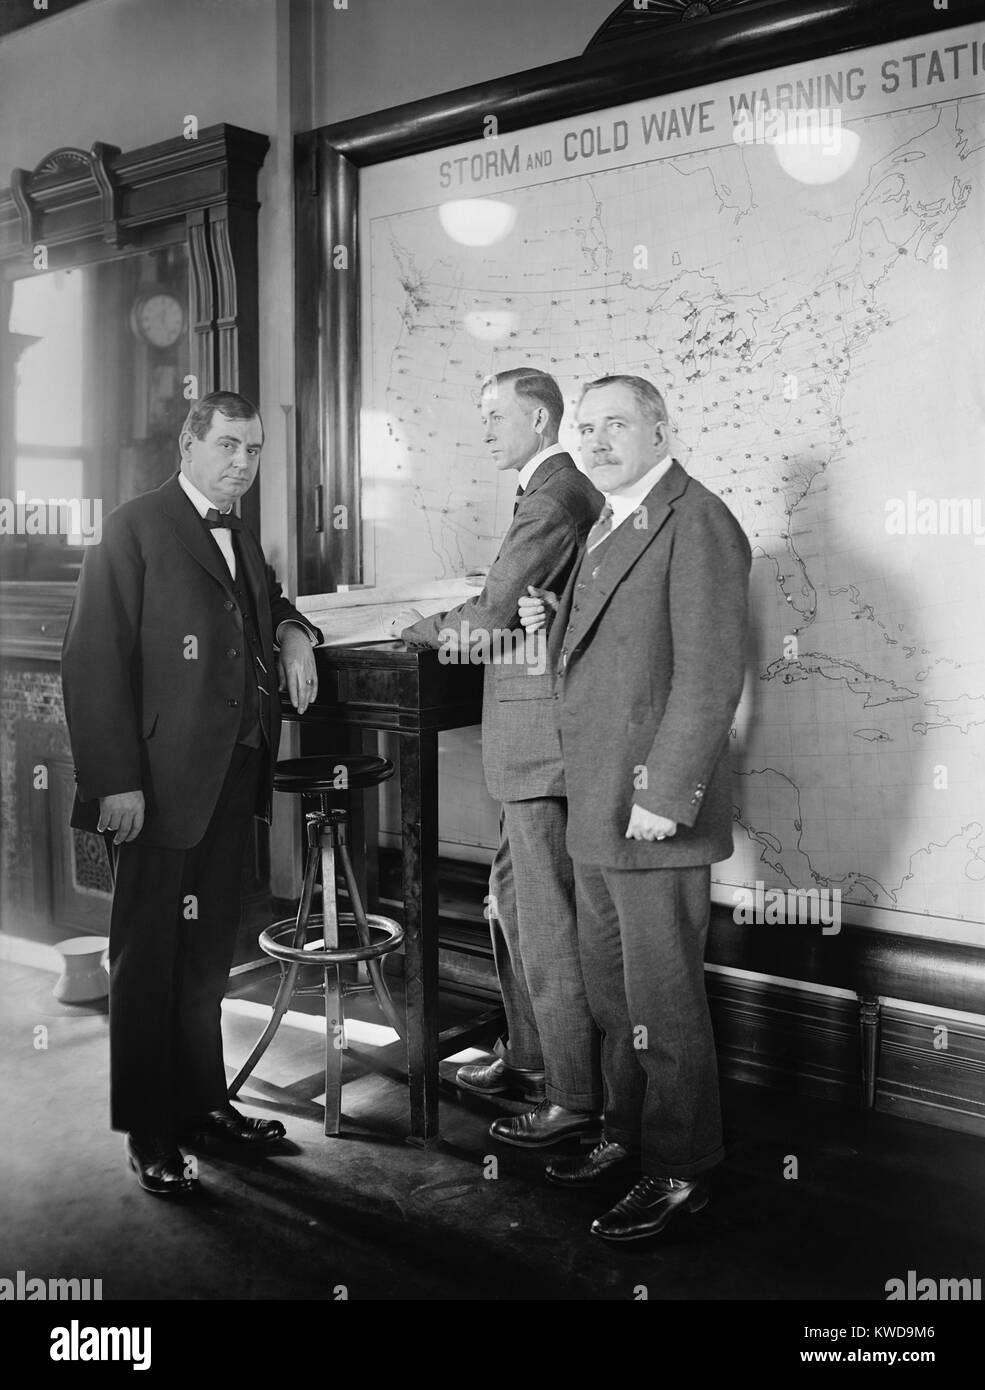 Meteorologists at the U.S. Weather Bureau stand in front of a map of the 48 states in 1924. Their map it titled, 'Warm and Cold Wave Warning Stations'. Wind speed and altitude data was collected by Weather Bureau reports from across the nation. L-R: Secretary Gore; R.H. Weightman; C.F. Marvin (BSLOC 2016 10 28) Stock Photo